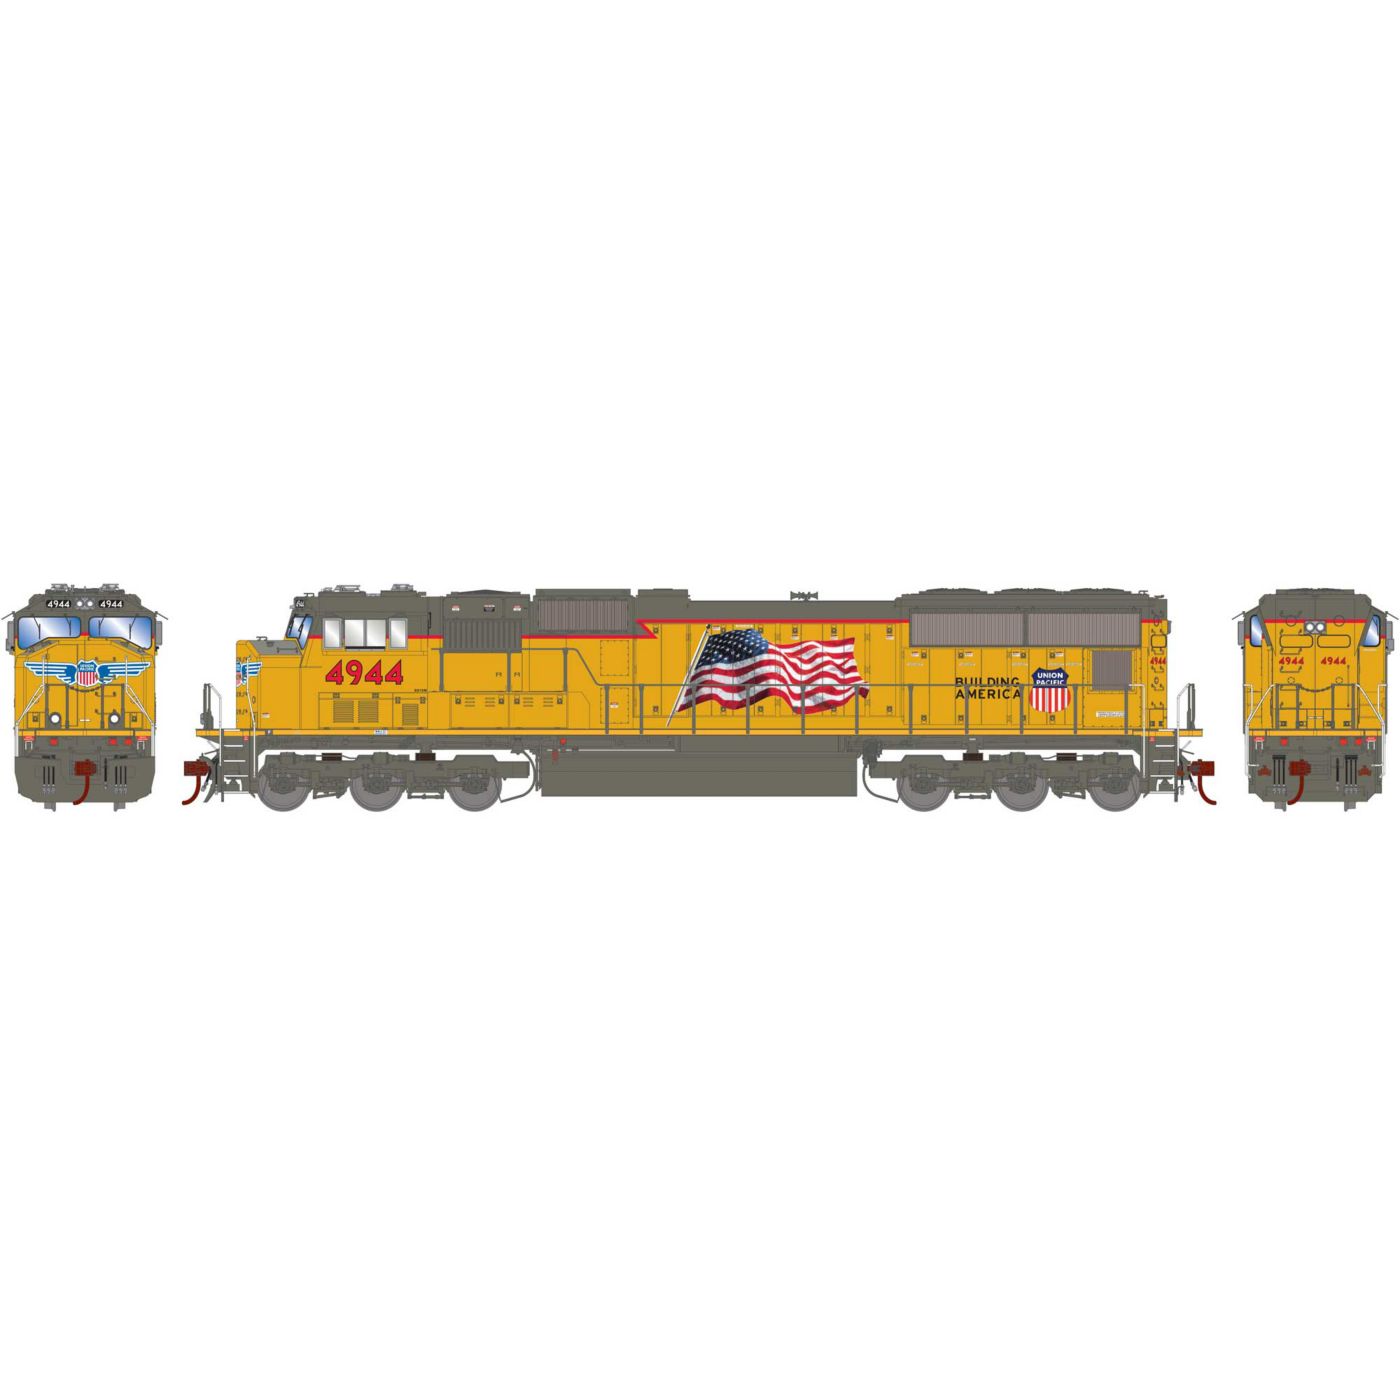 Details about   ATHEARN GENESIS HO SCALE G6165 SD-70M UNION PACIFIC "BUILDING AMERICA" #4526 